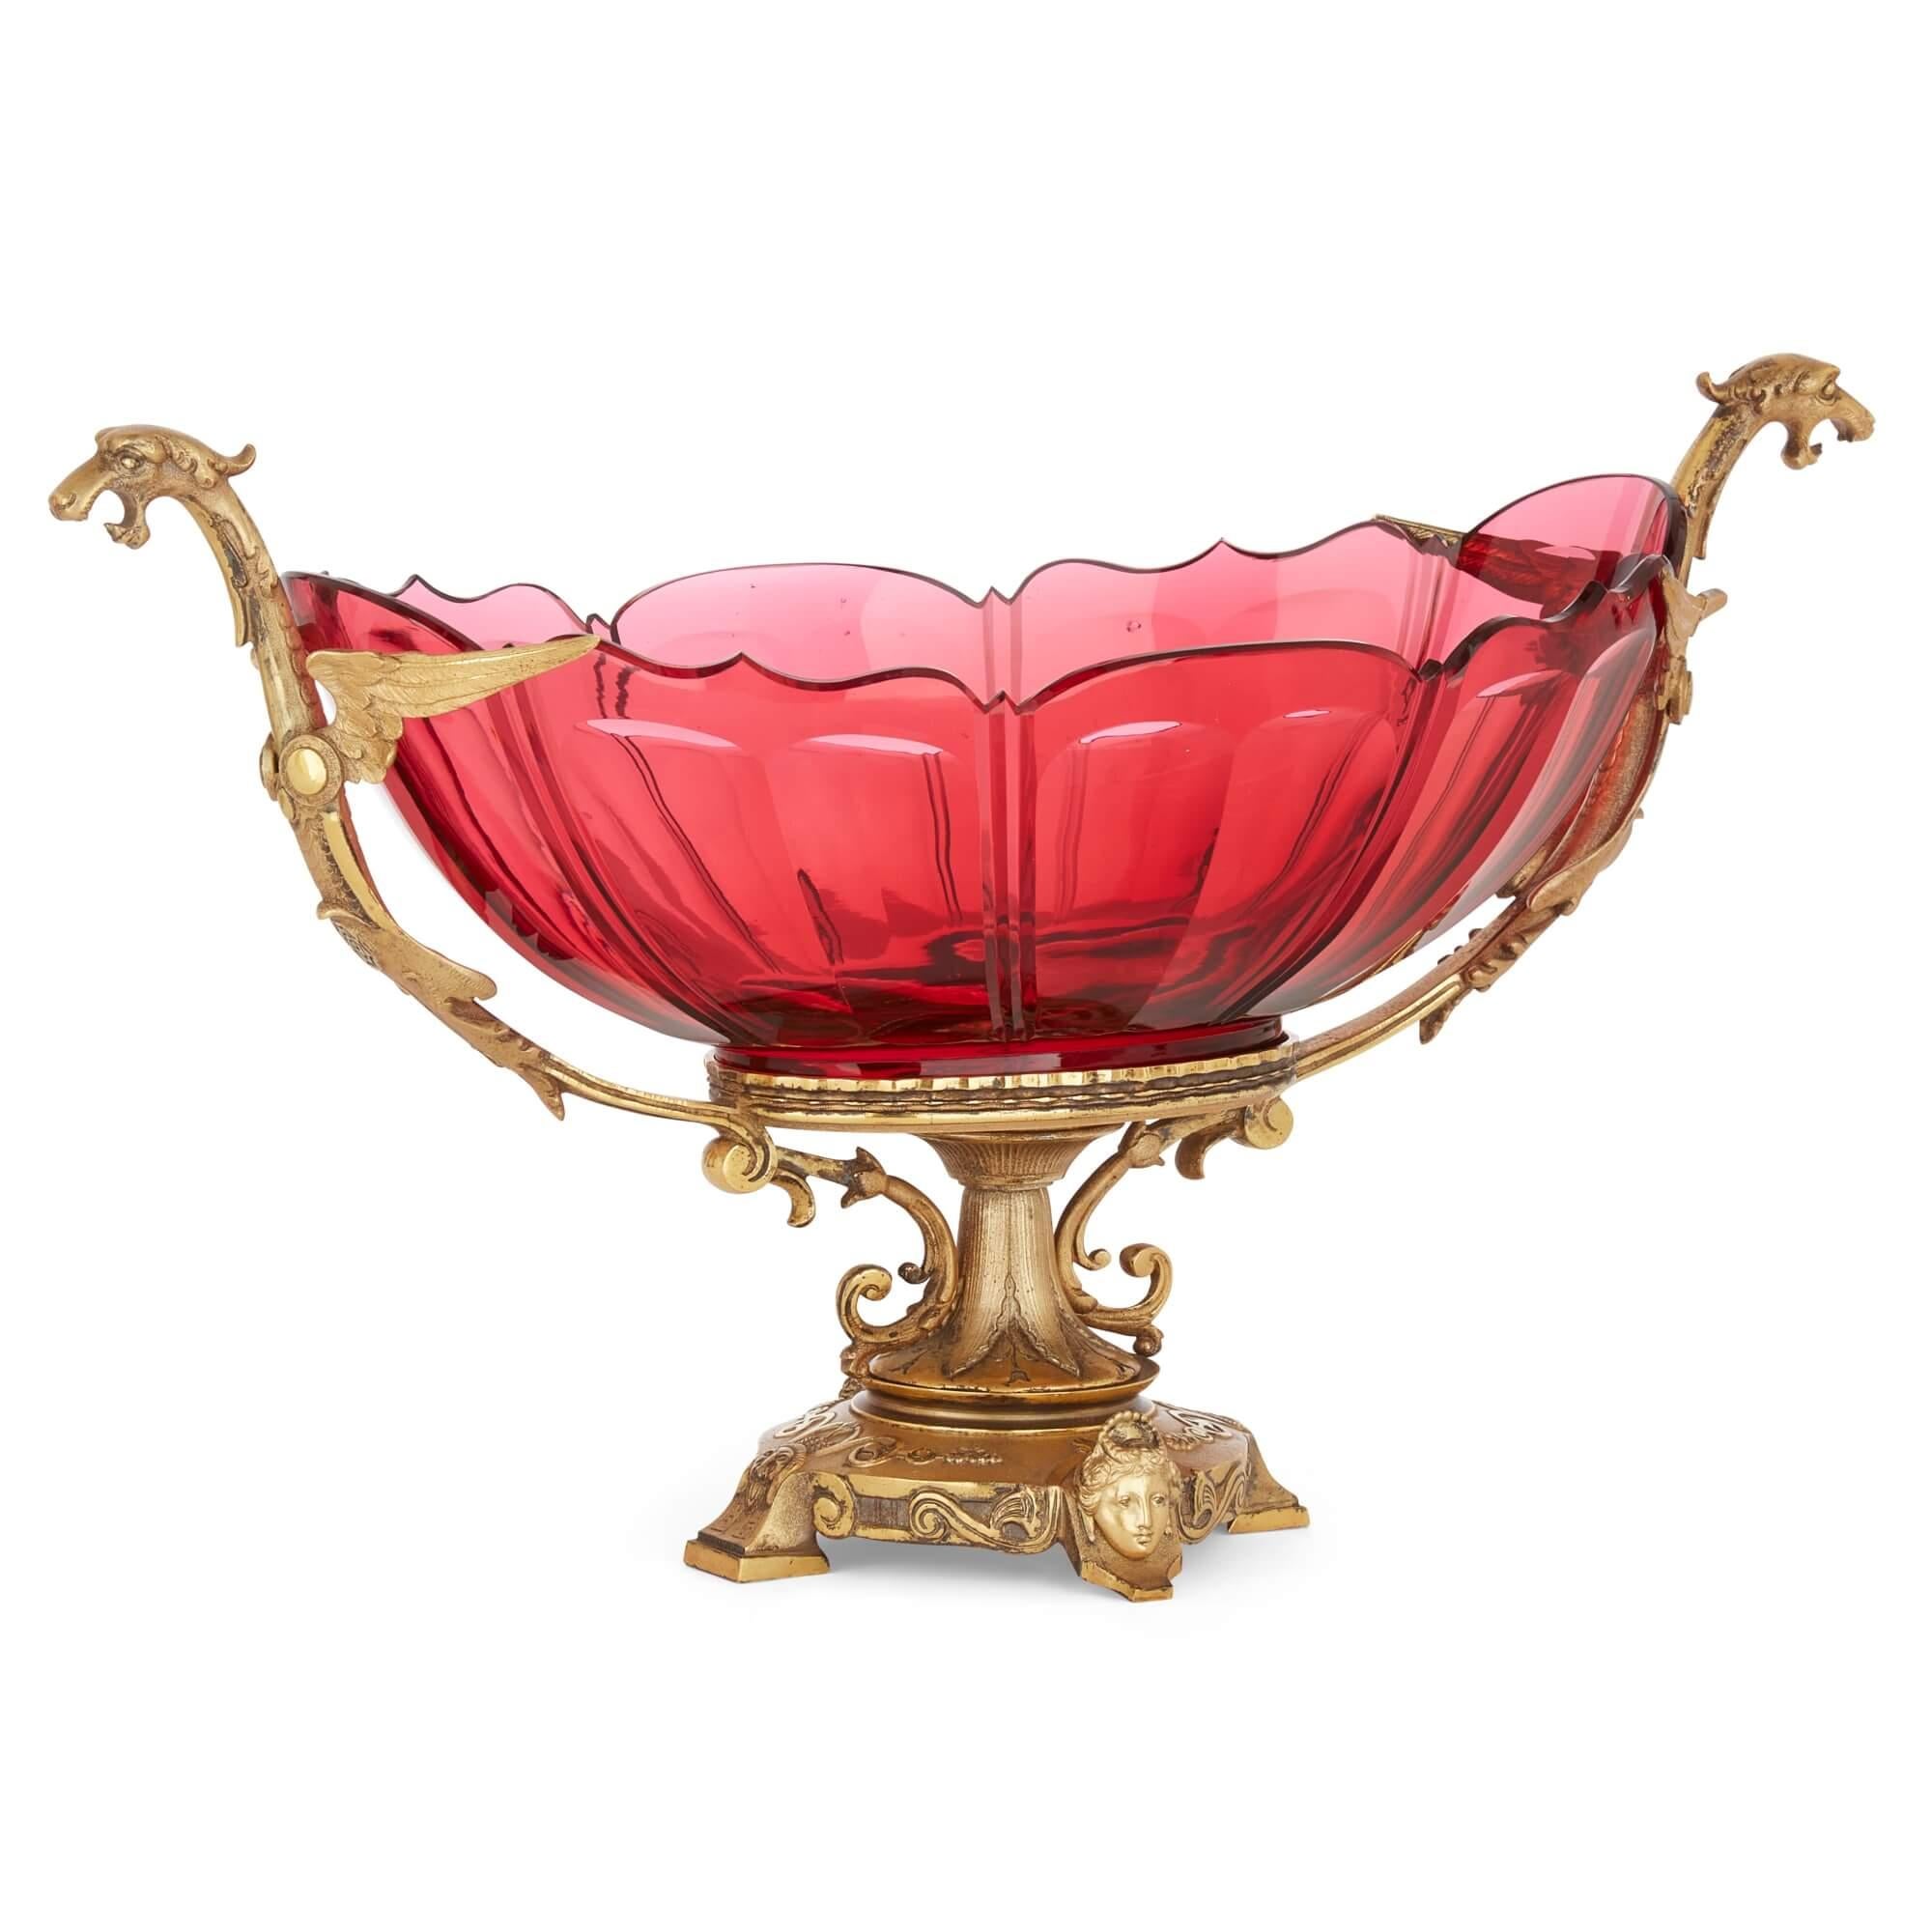 Large antique ormolu mounted red glass centrepiece suite by Baccarat
French, Late 19th Century  
Cornucopia: Height 38cm, width 24cm, depth 19.5cm 
Dish: Height 31cm, width 53cm, depth 25.5cm 

This outstanding large centrepiece suite was crafted in